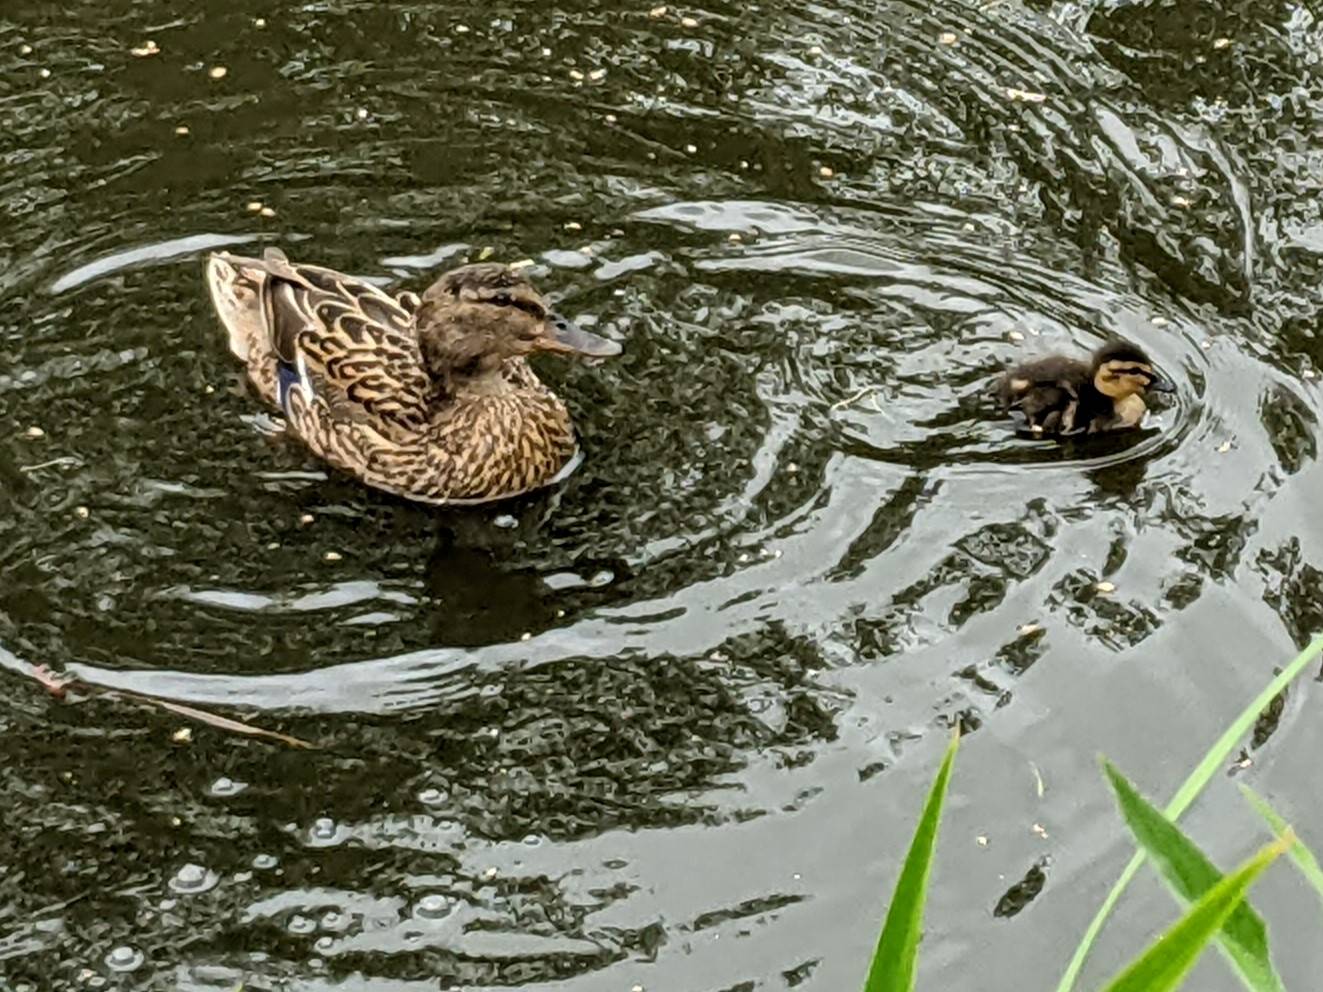 One of the year's first ducklings, May 25th